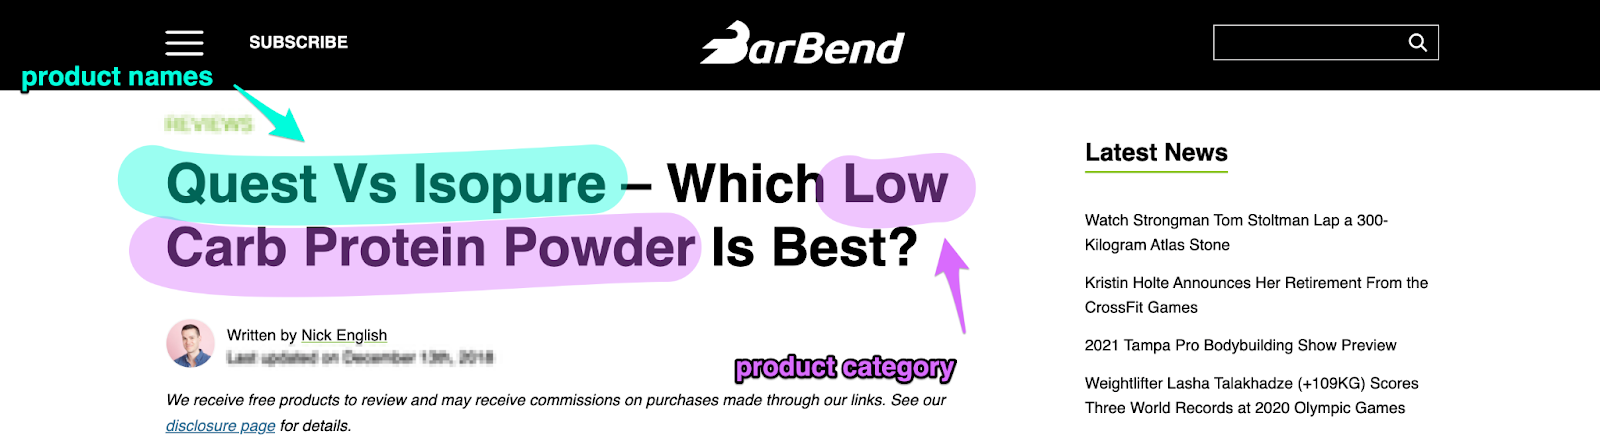 this quest vs. isopure: which low carb protein powder is best has a headline with both product names and its product category